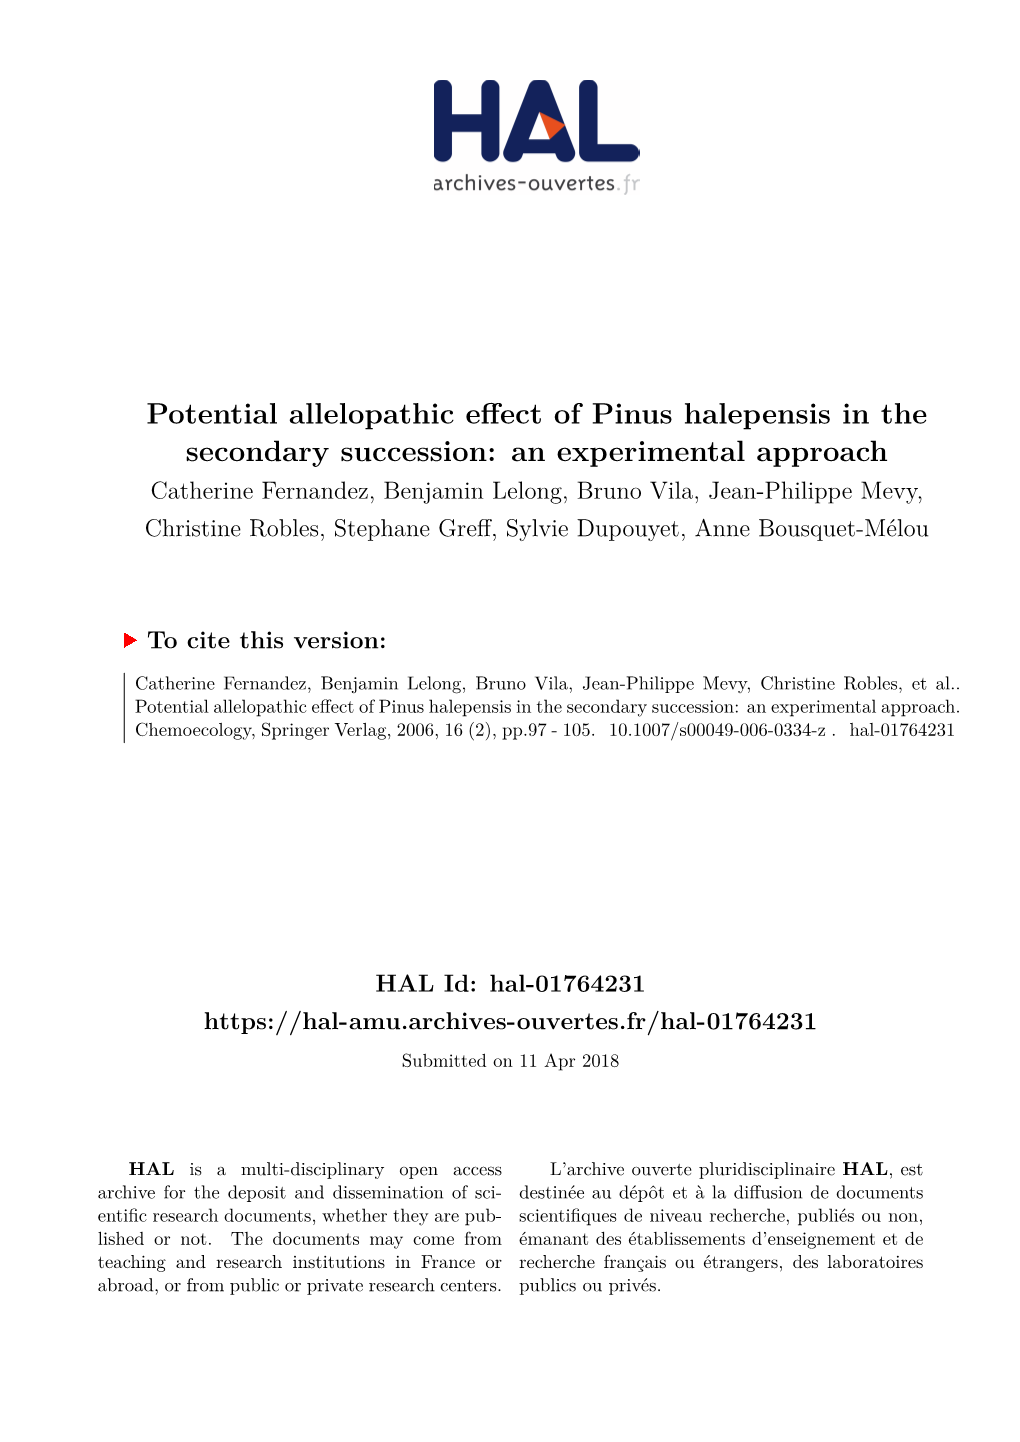 Potential Allelopathic Effect of Pinus Halepensis in The